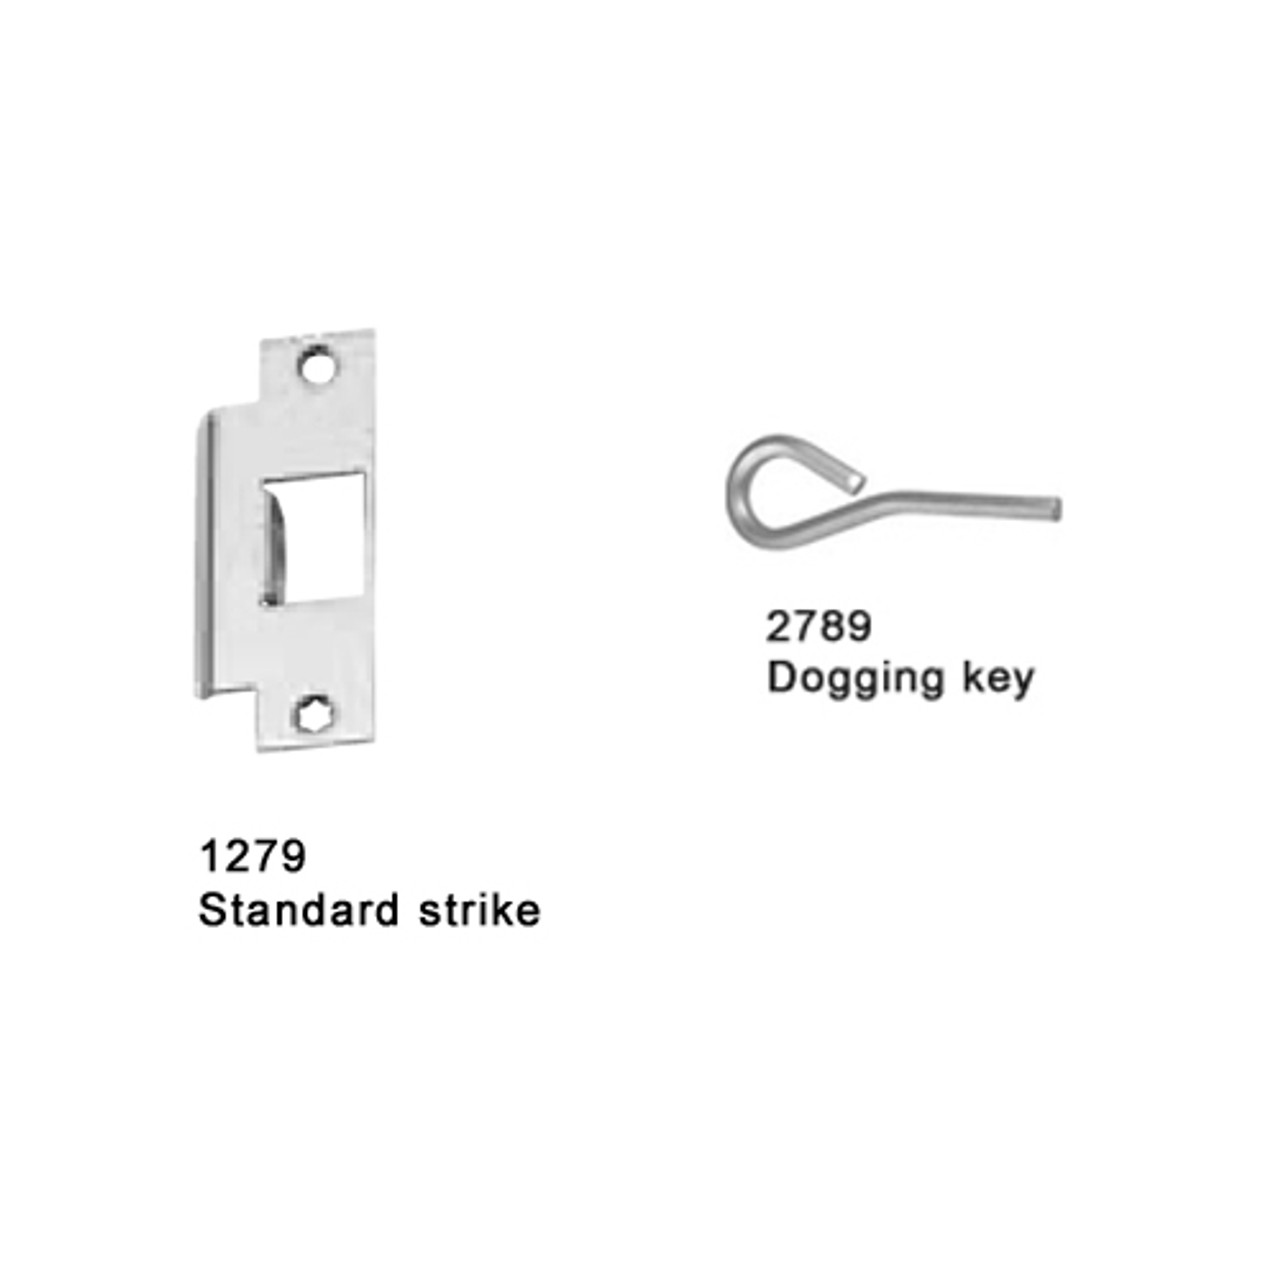 25-M-NL-US32-3-RHR Falcon 25 Series Mortise Lock Devices with 512NL Night Latch Trim in Polished Stainless Steel